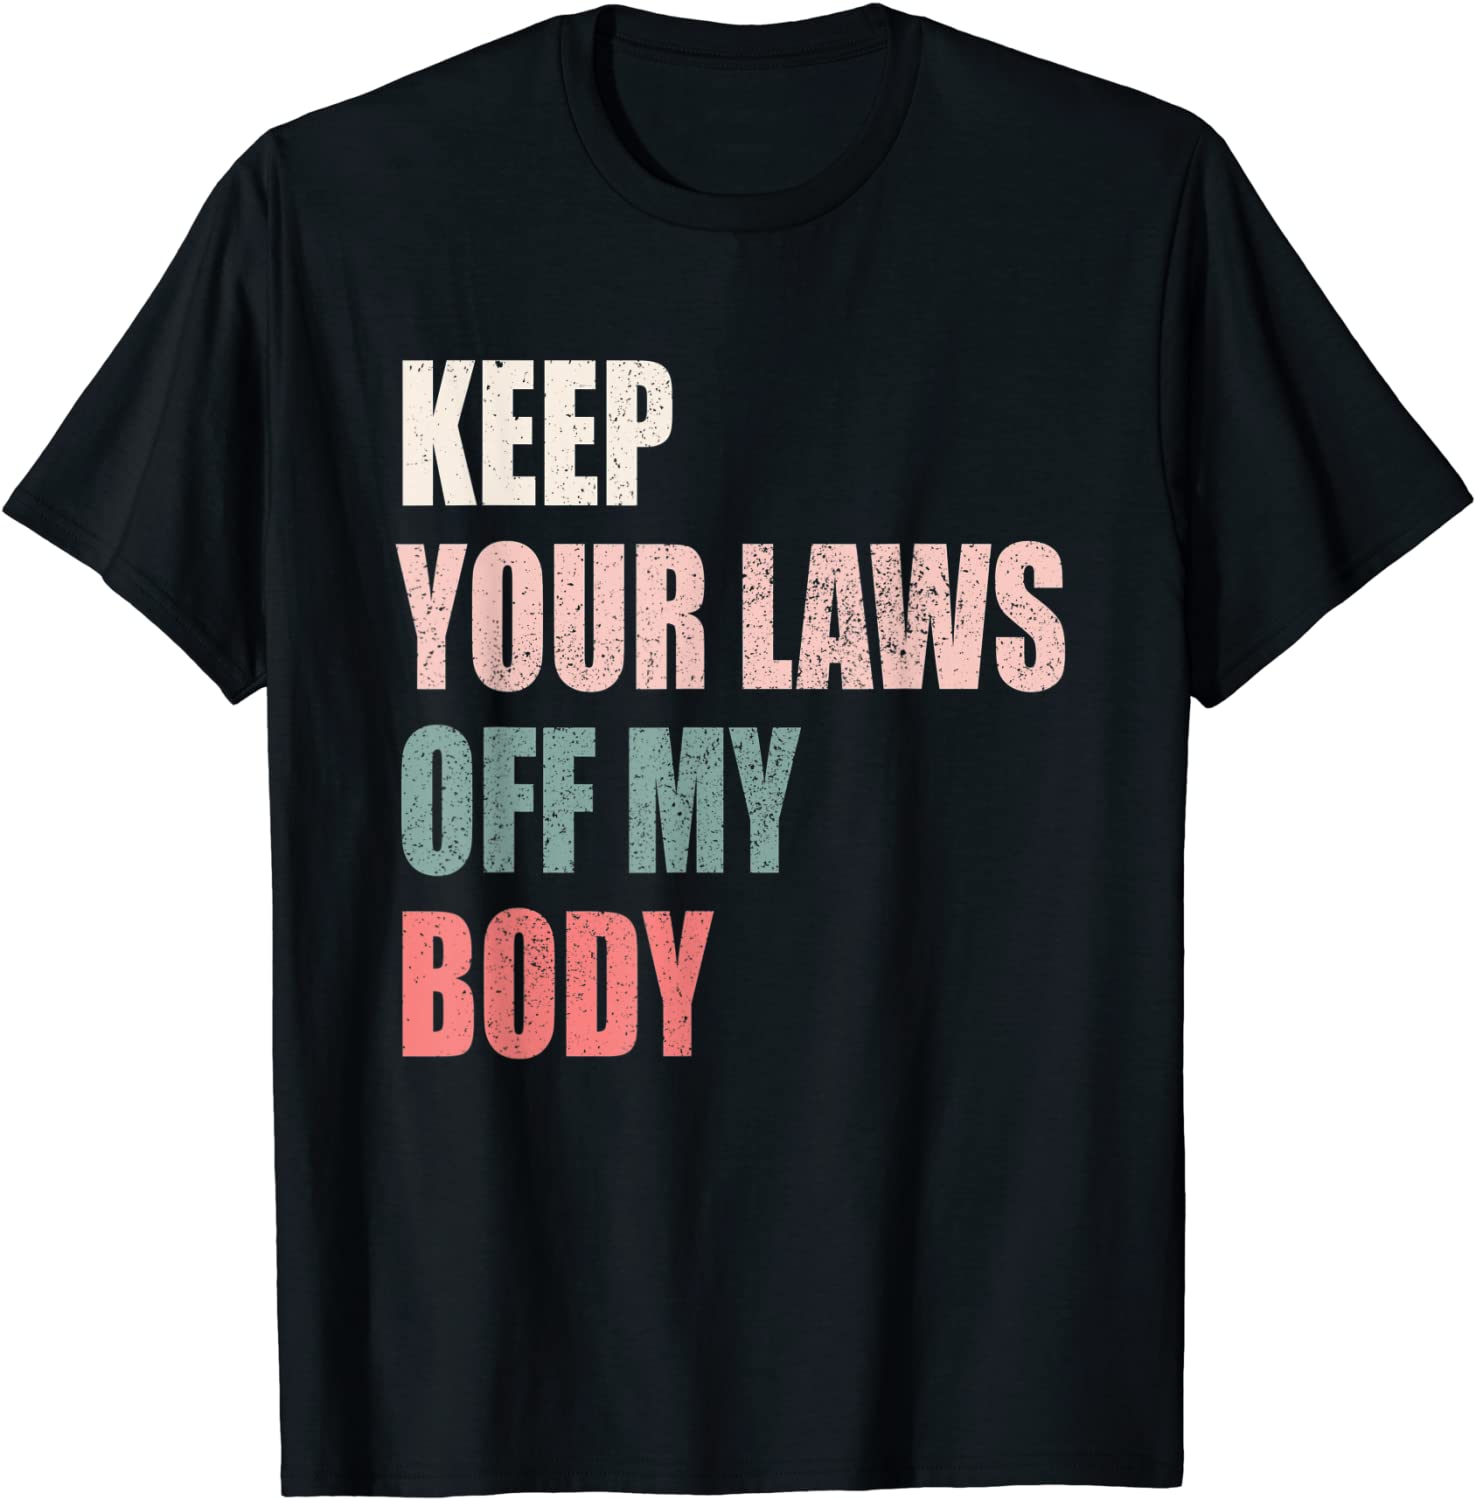 Keep Your Laws Off My Body Pro-Choice Feminist Abortion 2022 Shirt ...